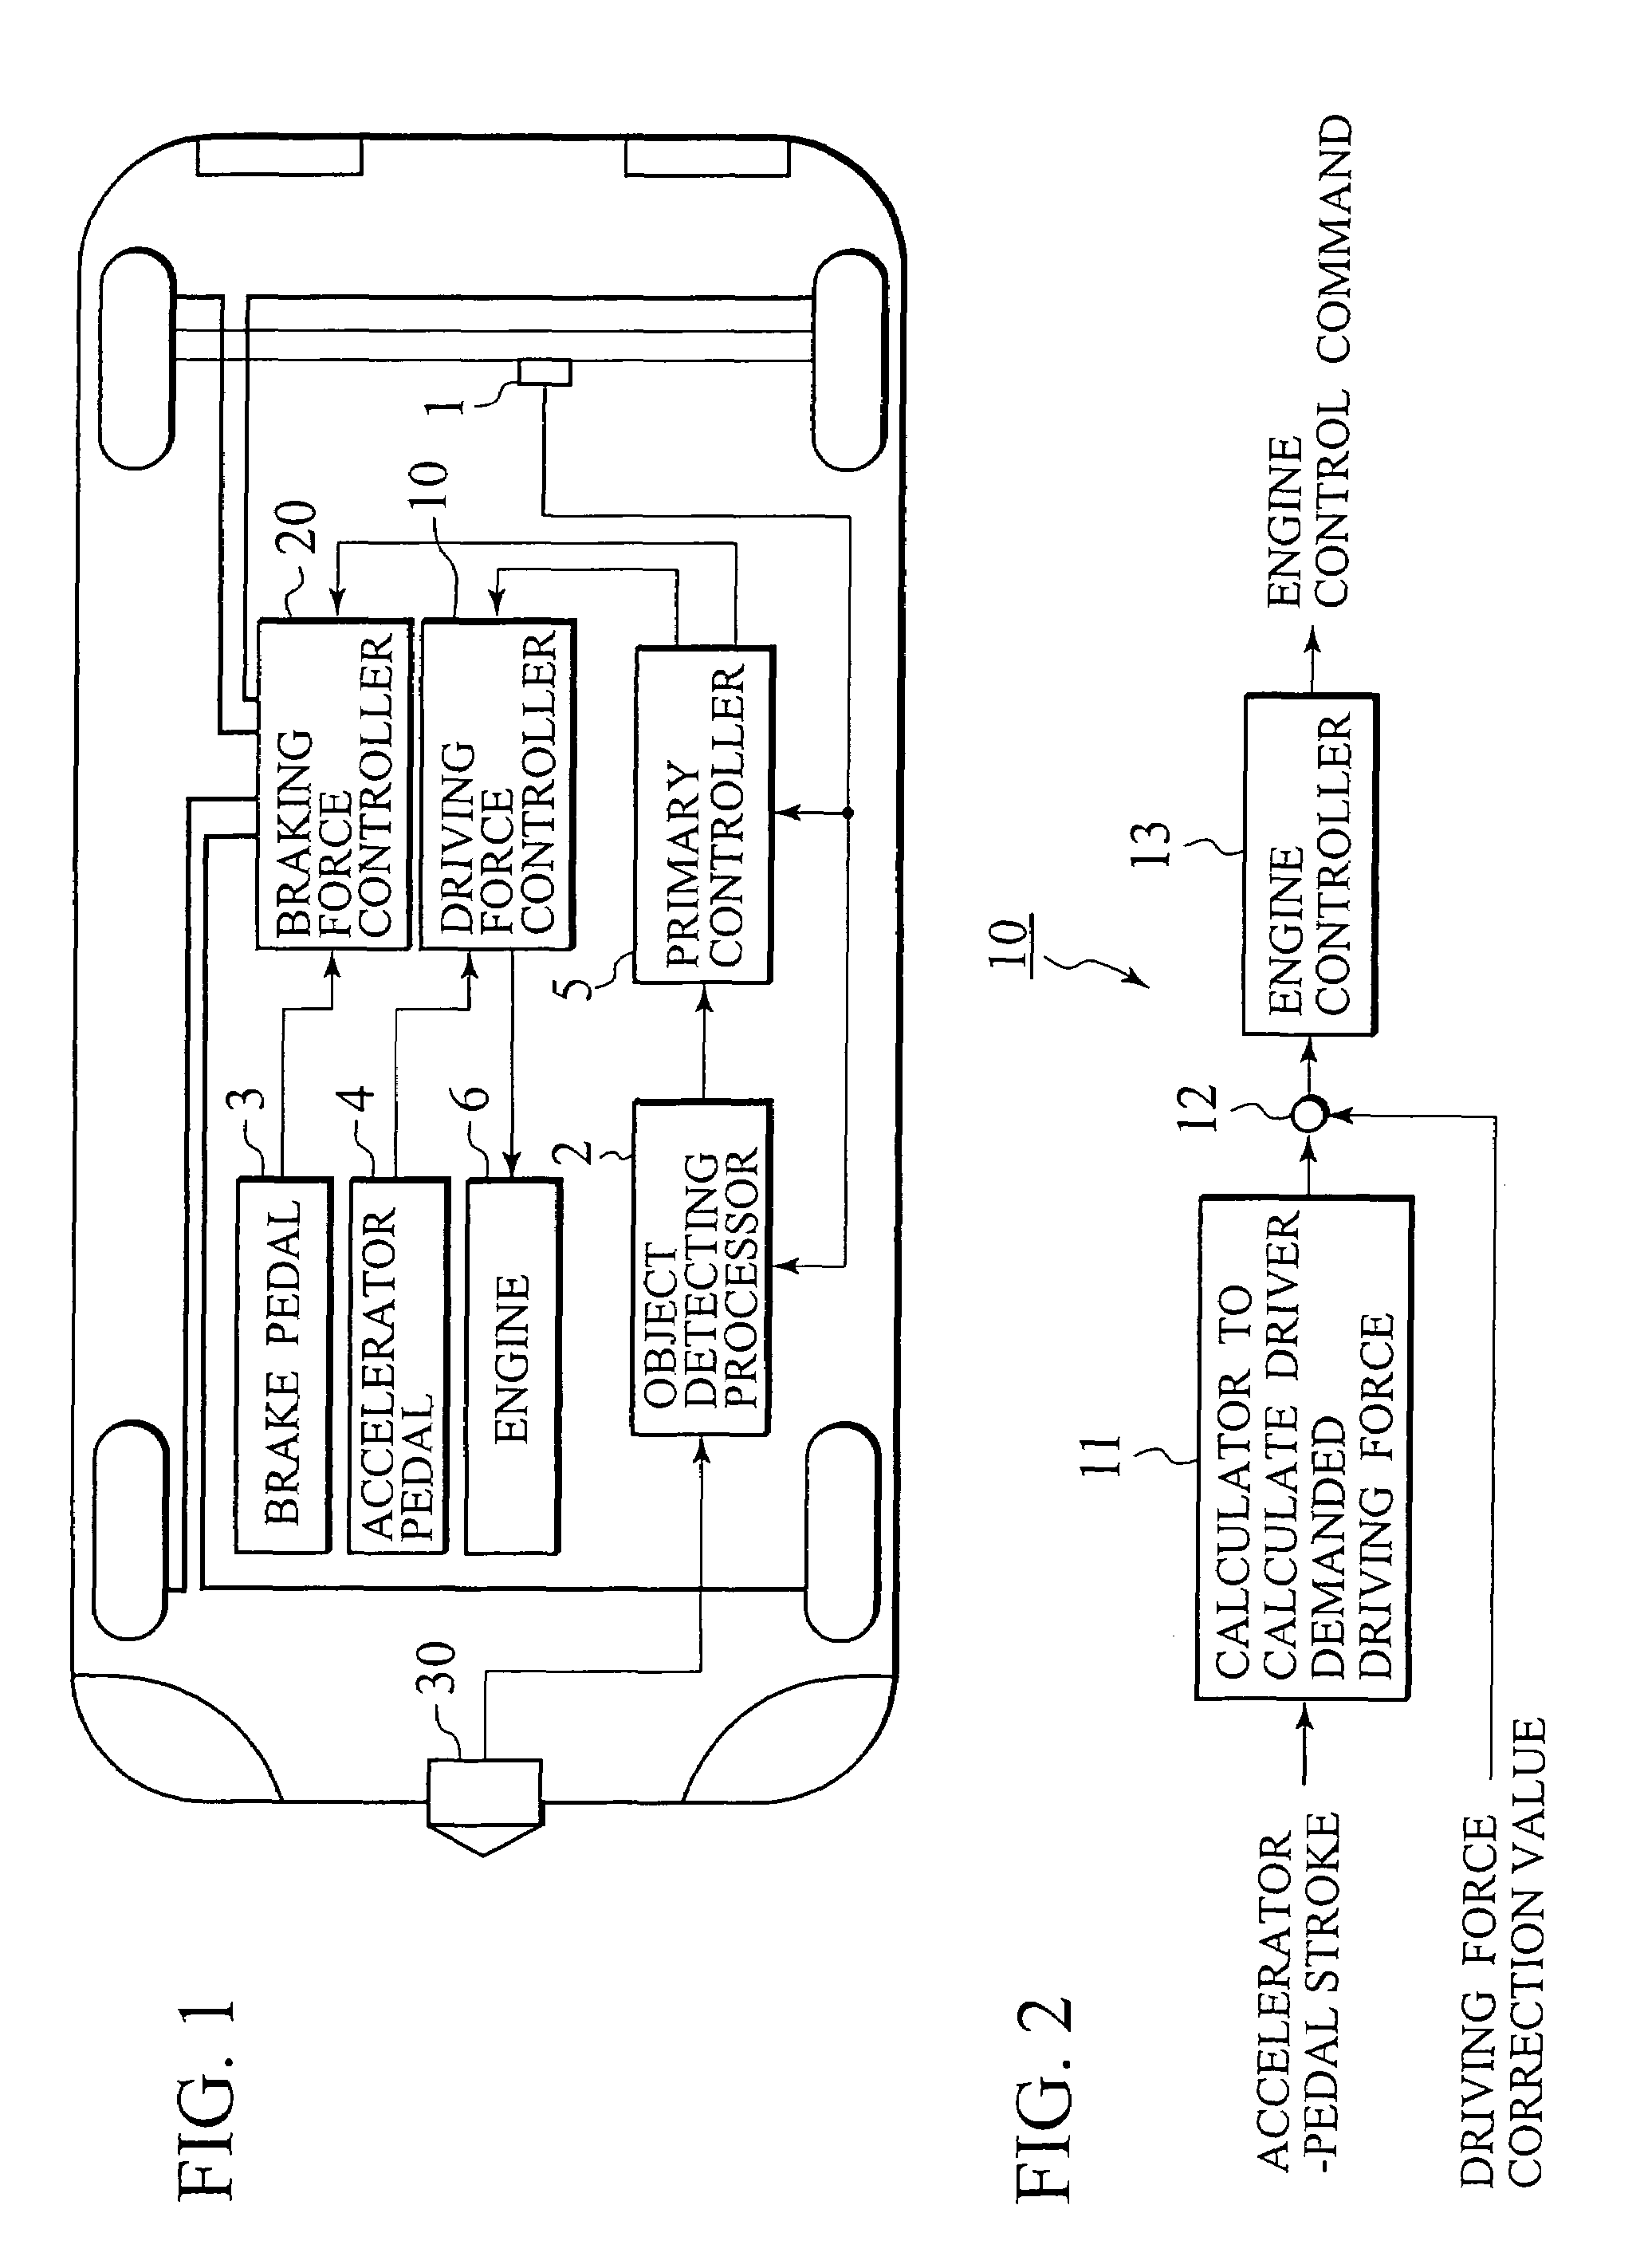 Information providing apparatus for a vehicle